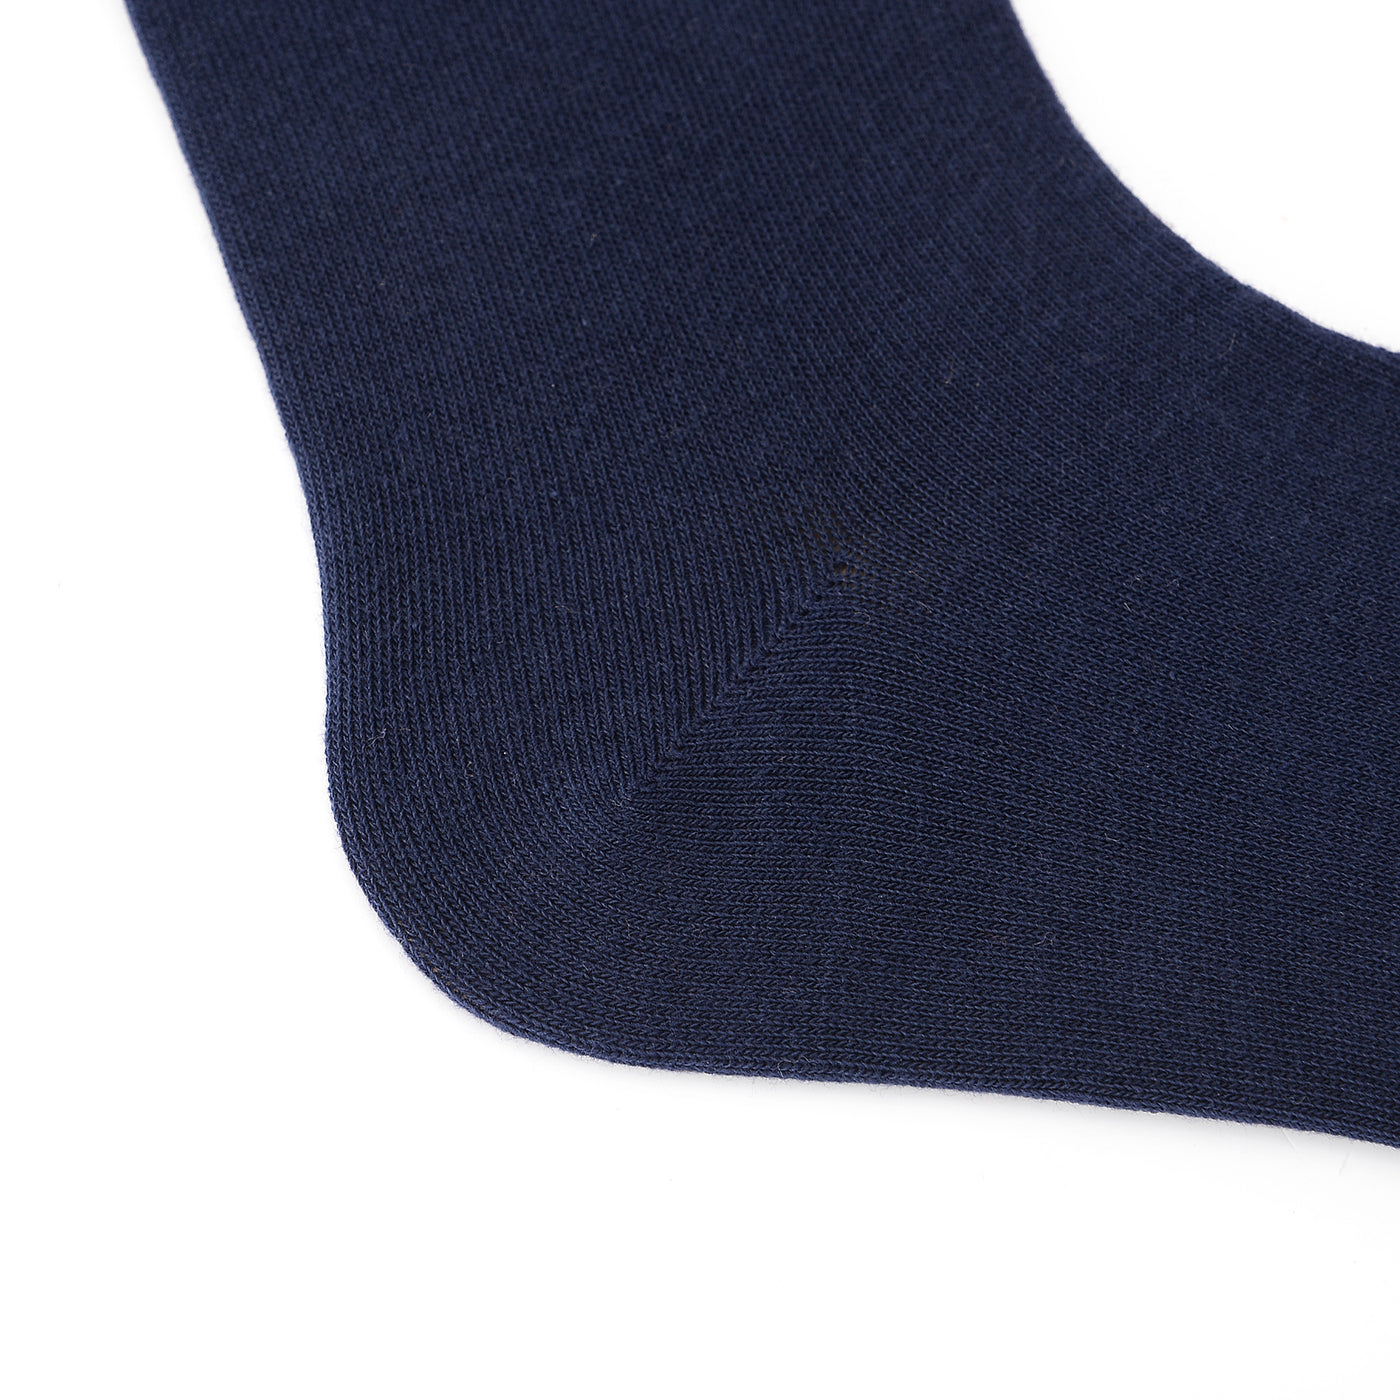 4 Pairs Finest Combed Cotton Smooth Seamless Toe Business Socks, Navy, Gift Set